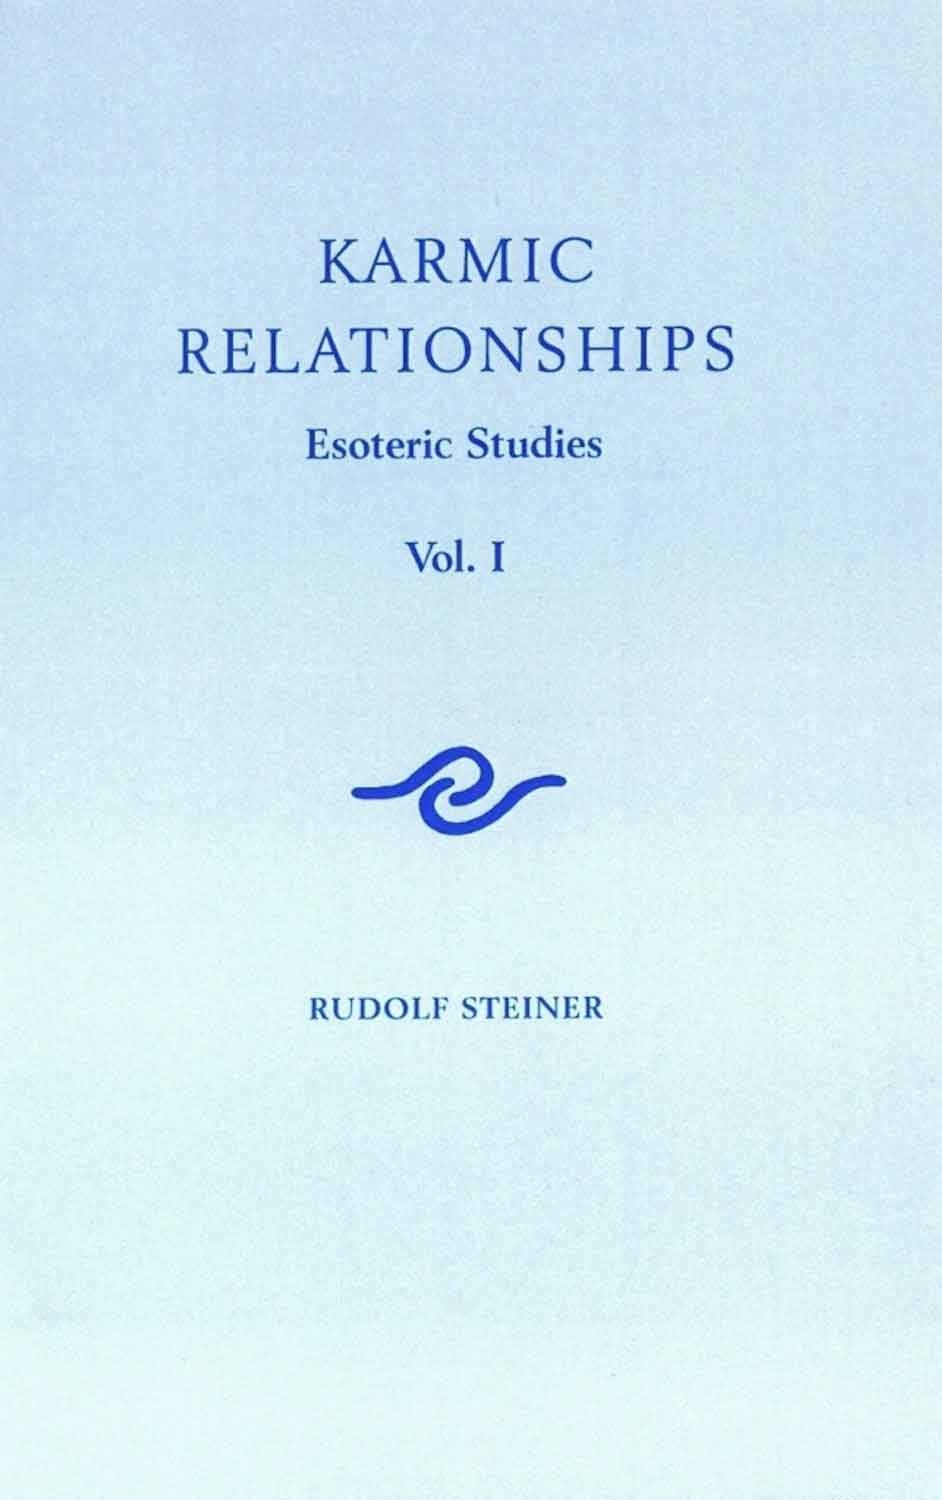 Episode 61: Lecture 61: Karmic Relationships given on August 1 1924 by Rudolf Steiner